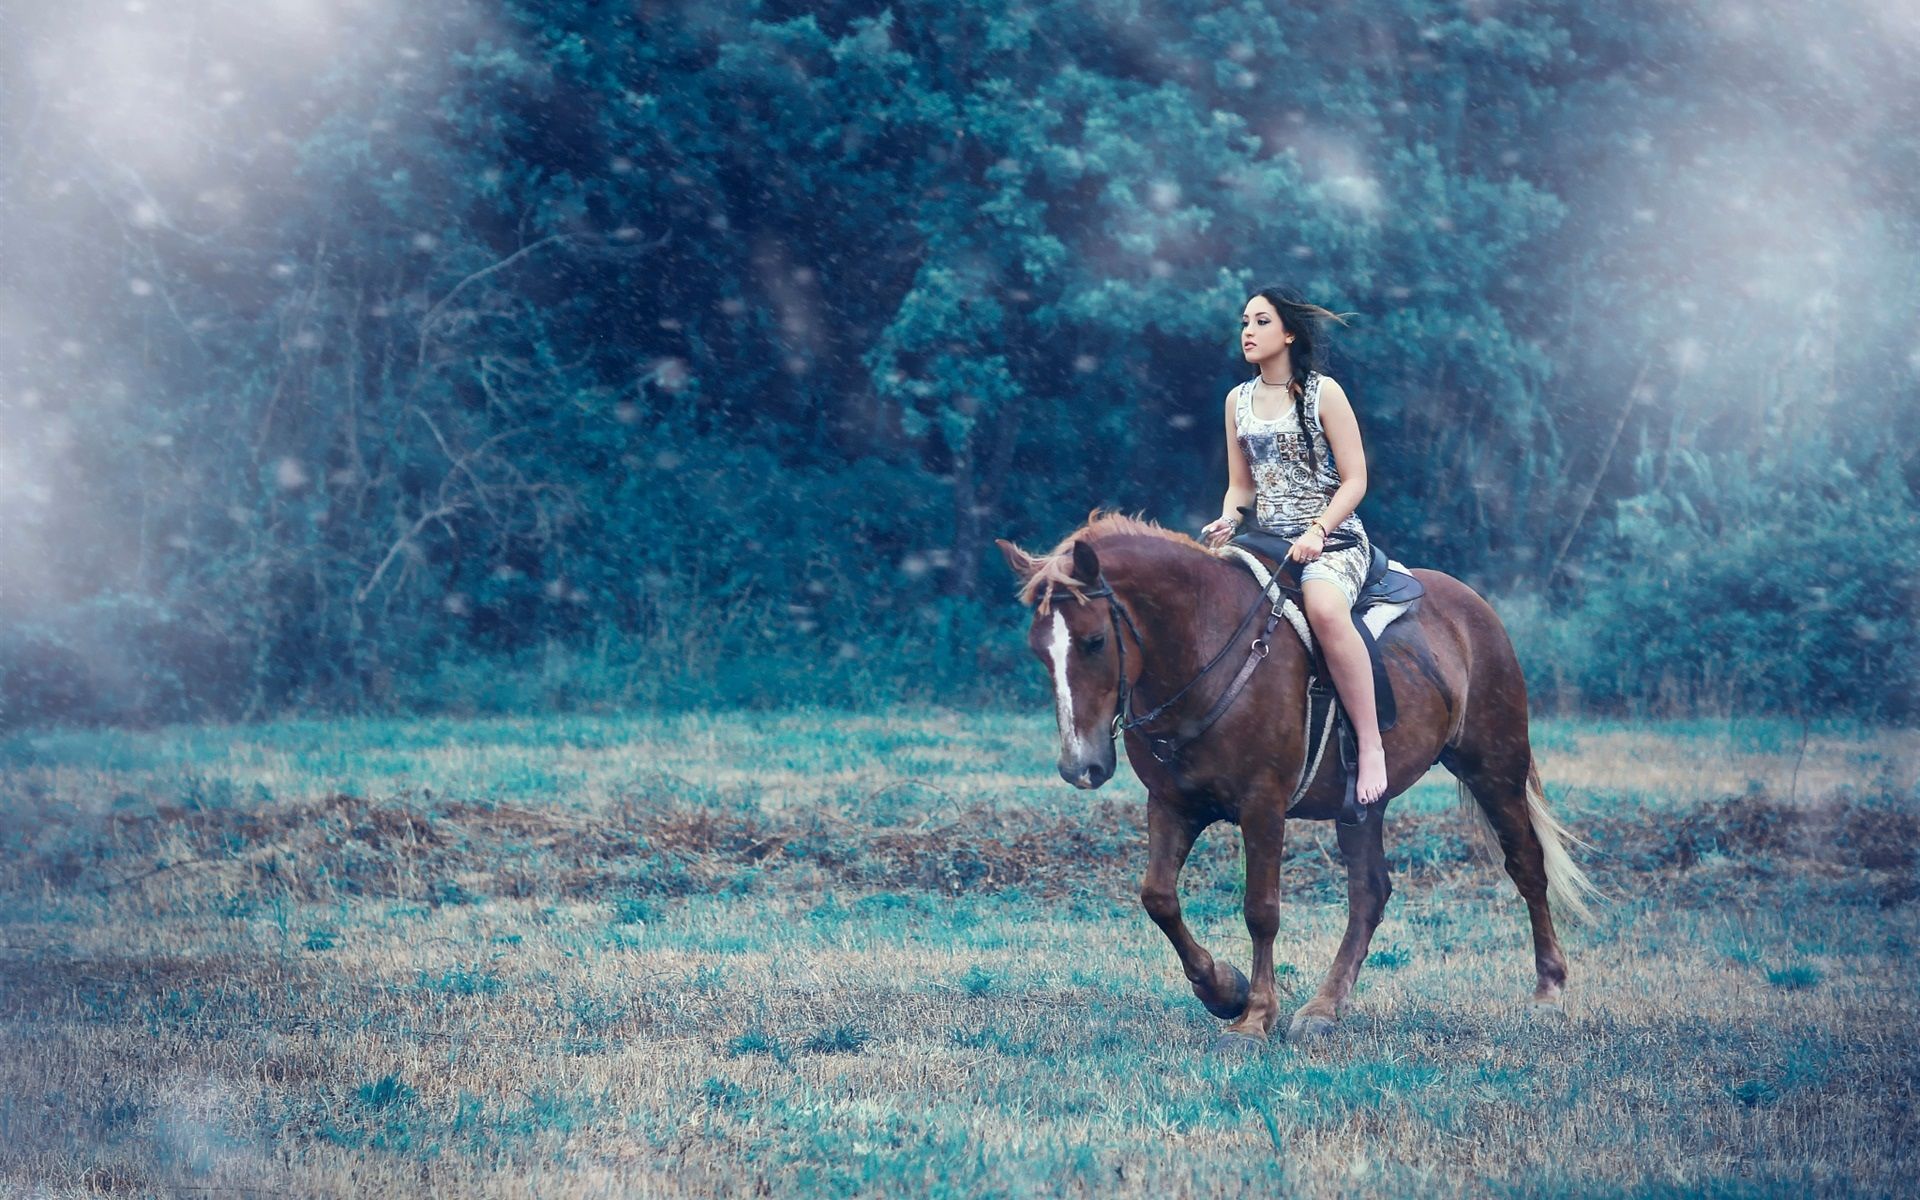 Wallpaper Girl riding horse 1920x1200 HD Picture, Image